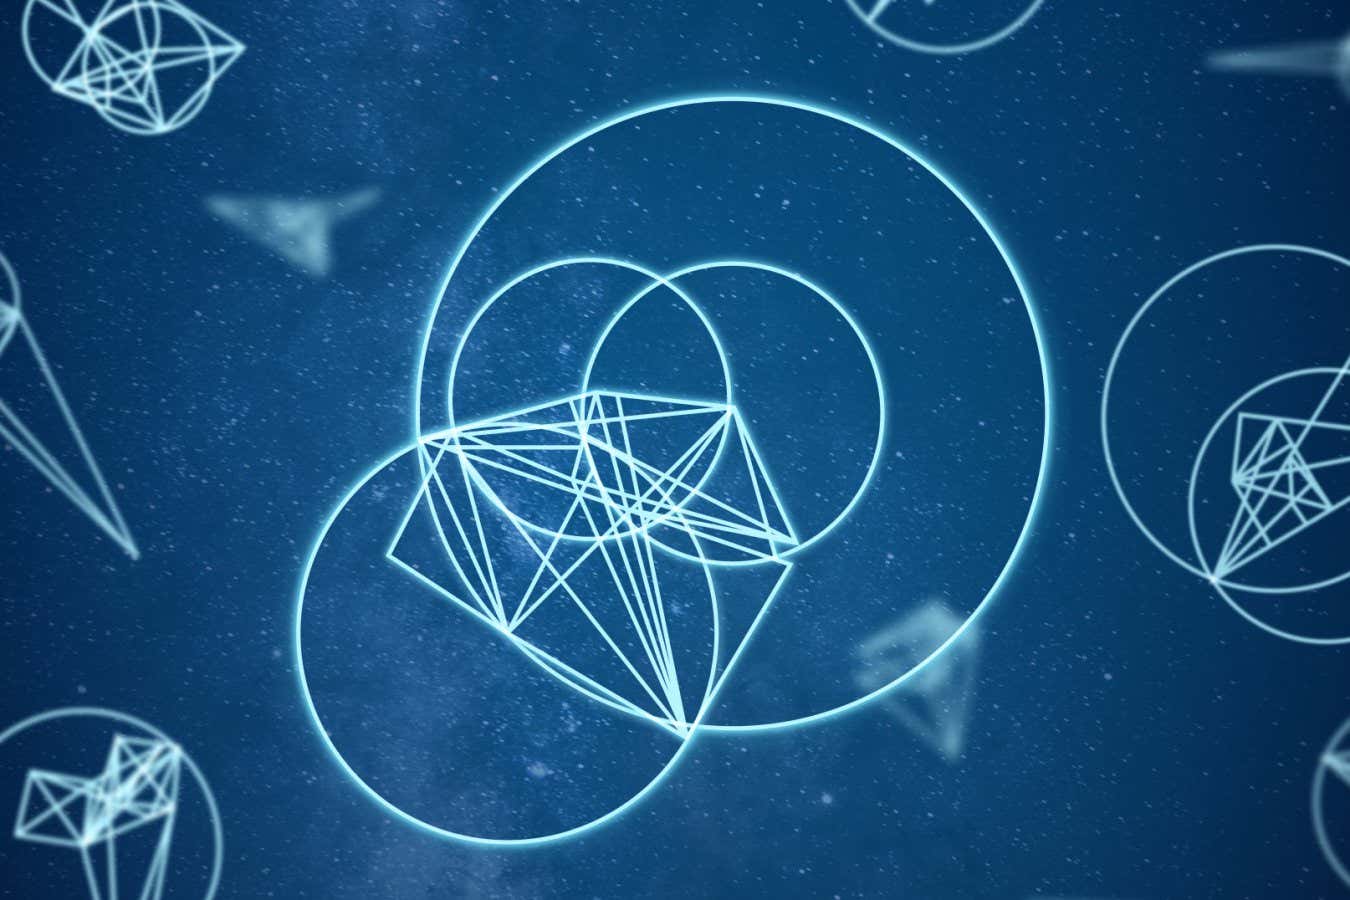 DeepMind AI solves hard geometry problems from mathematics olympiad